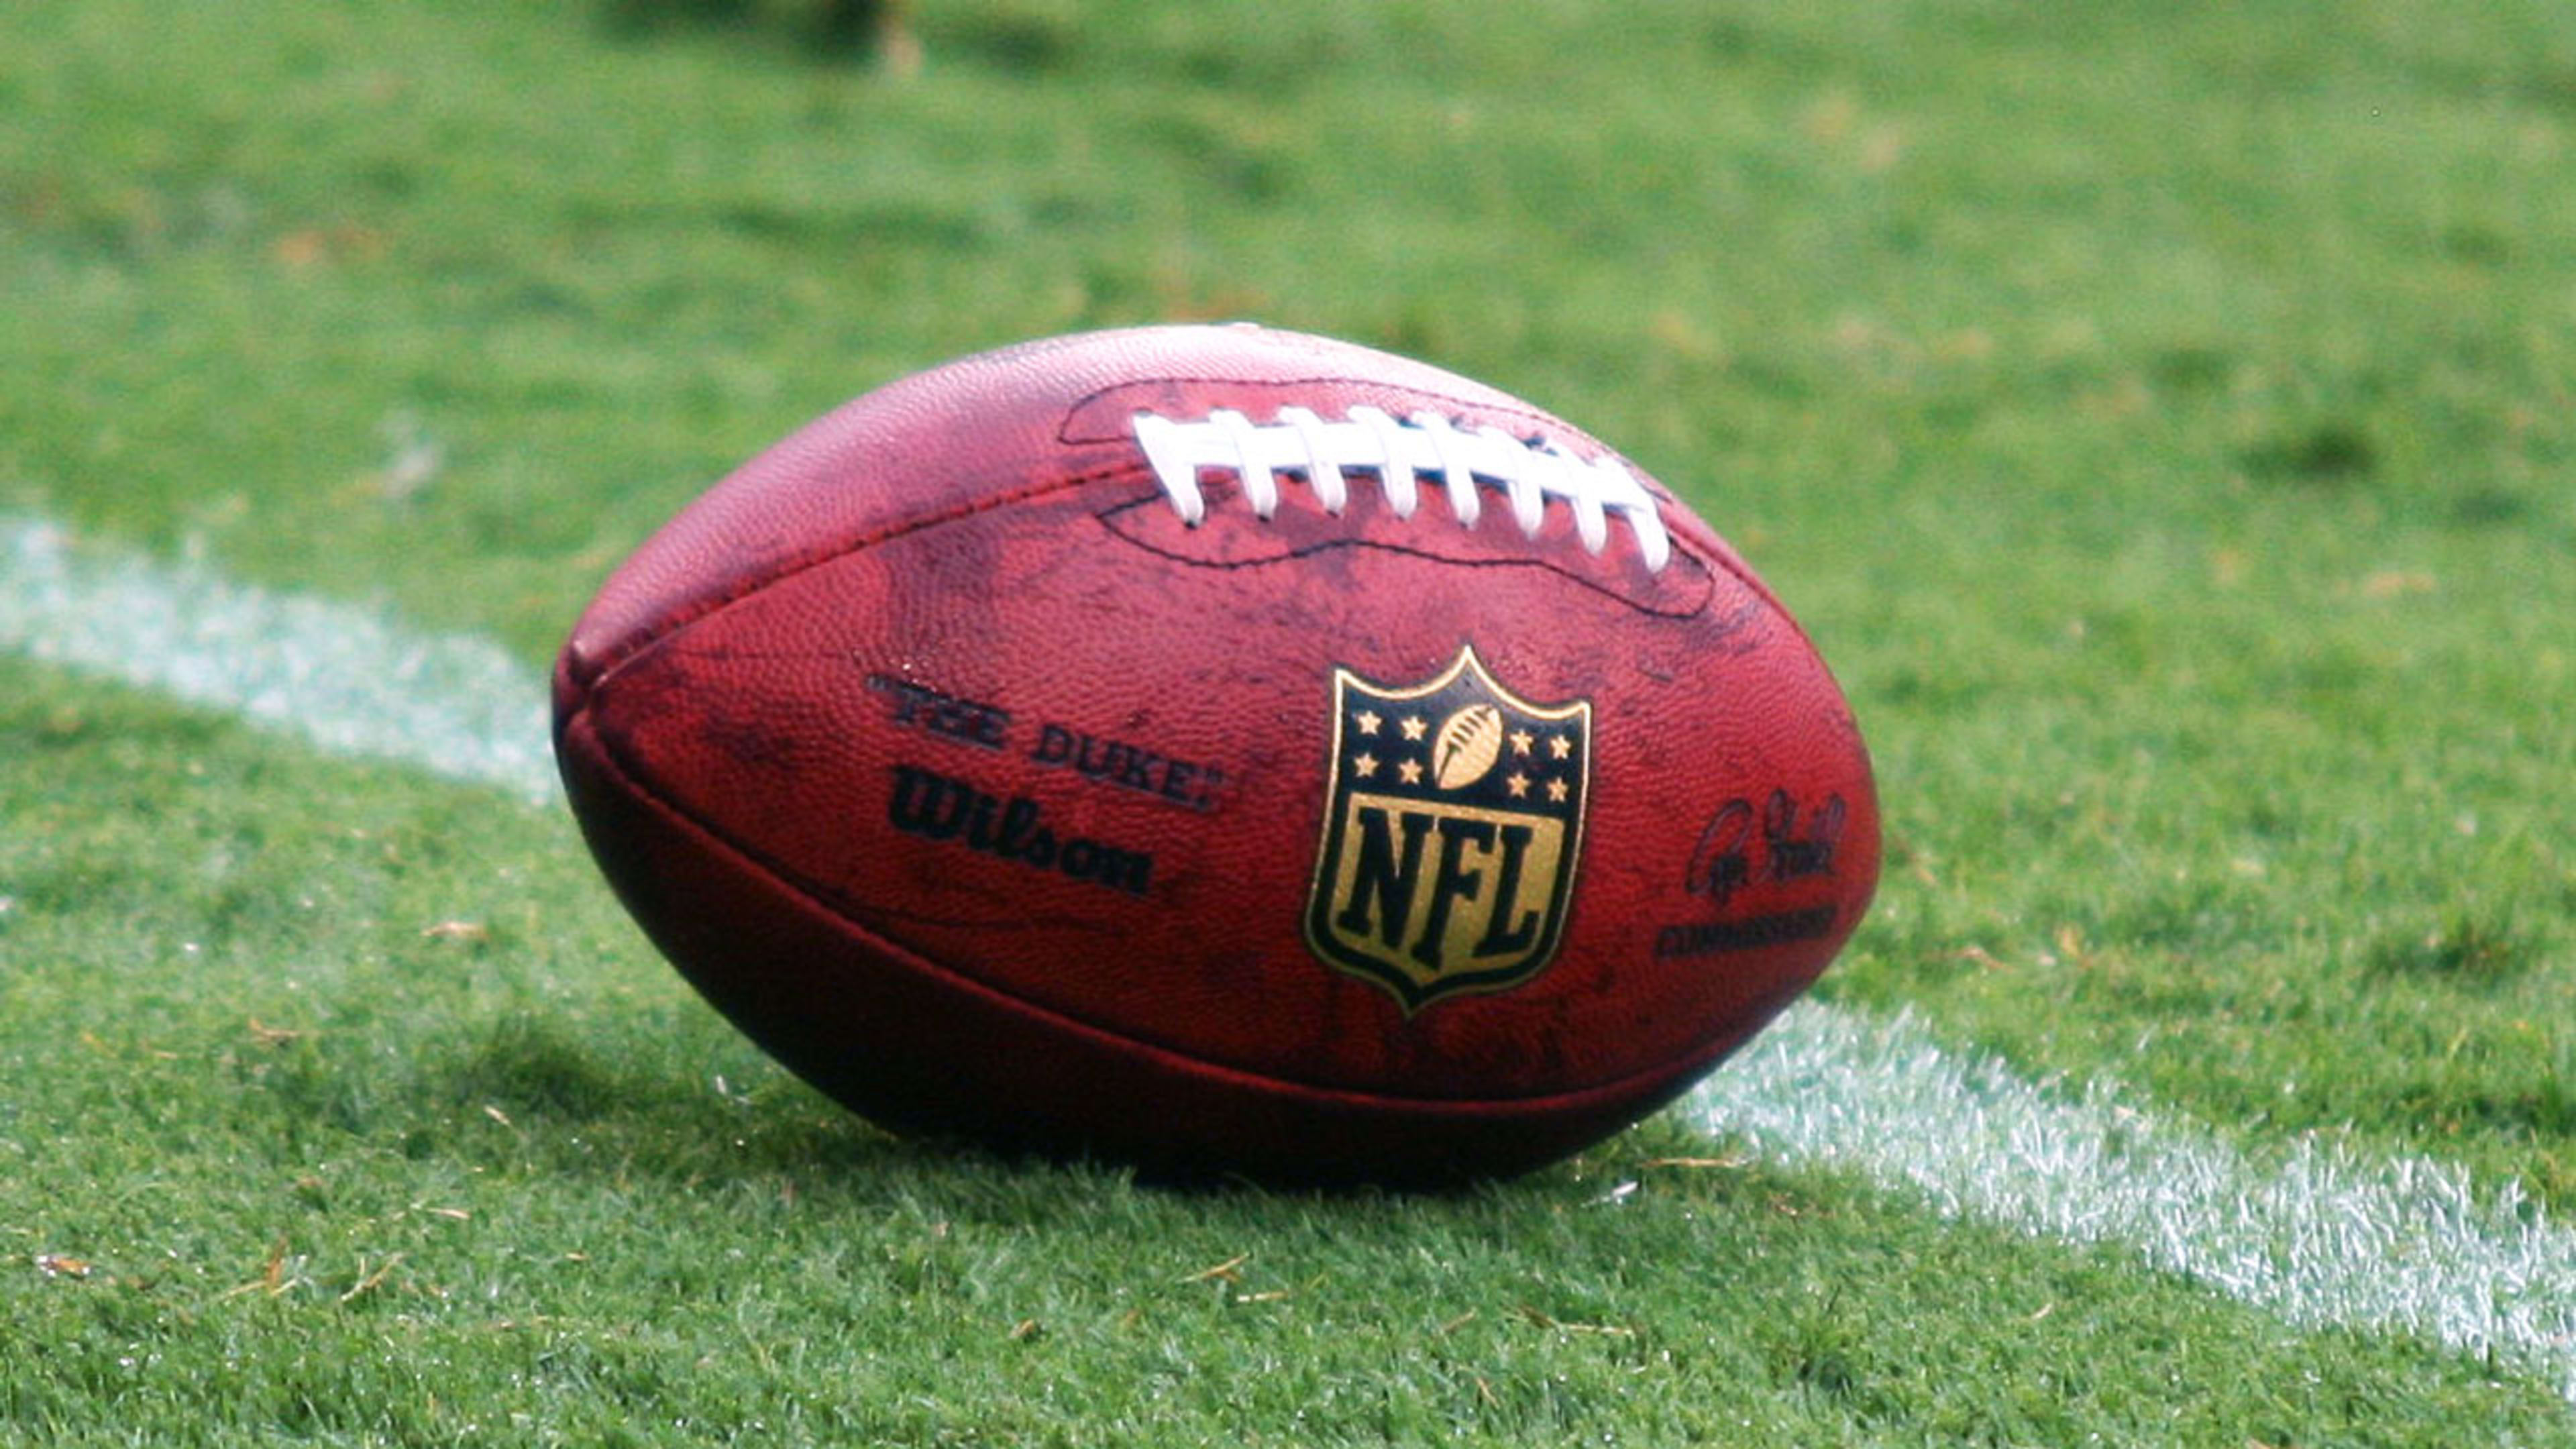 The NFL is putting data-collecting chips in all its footballs